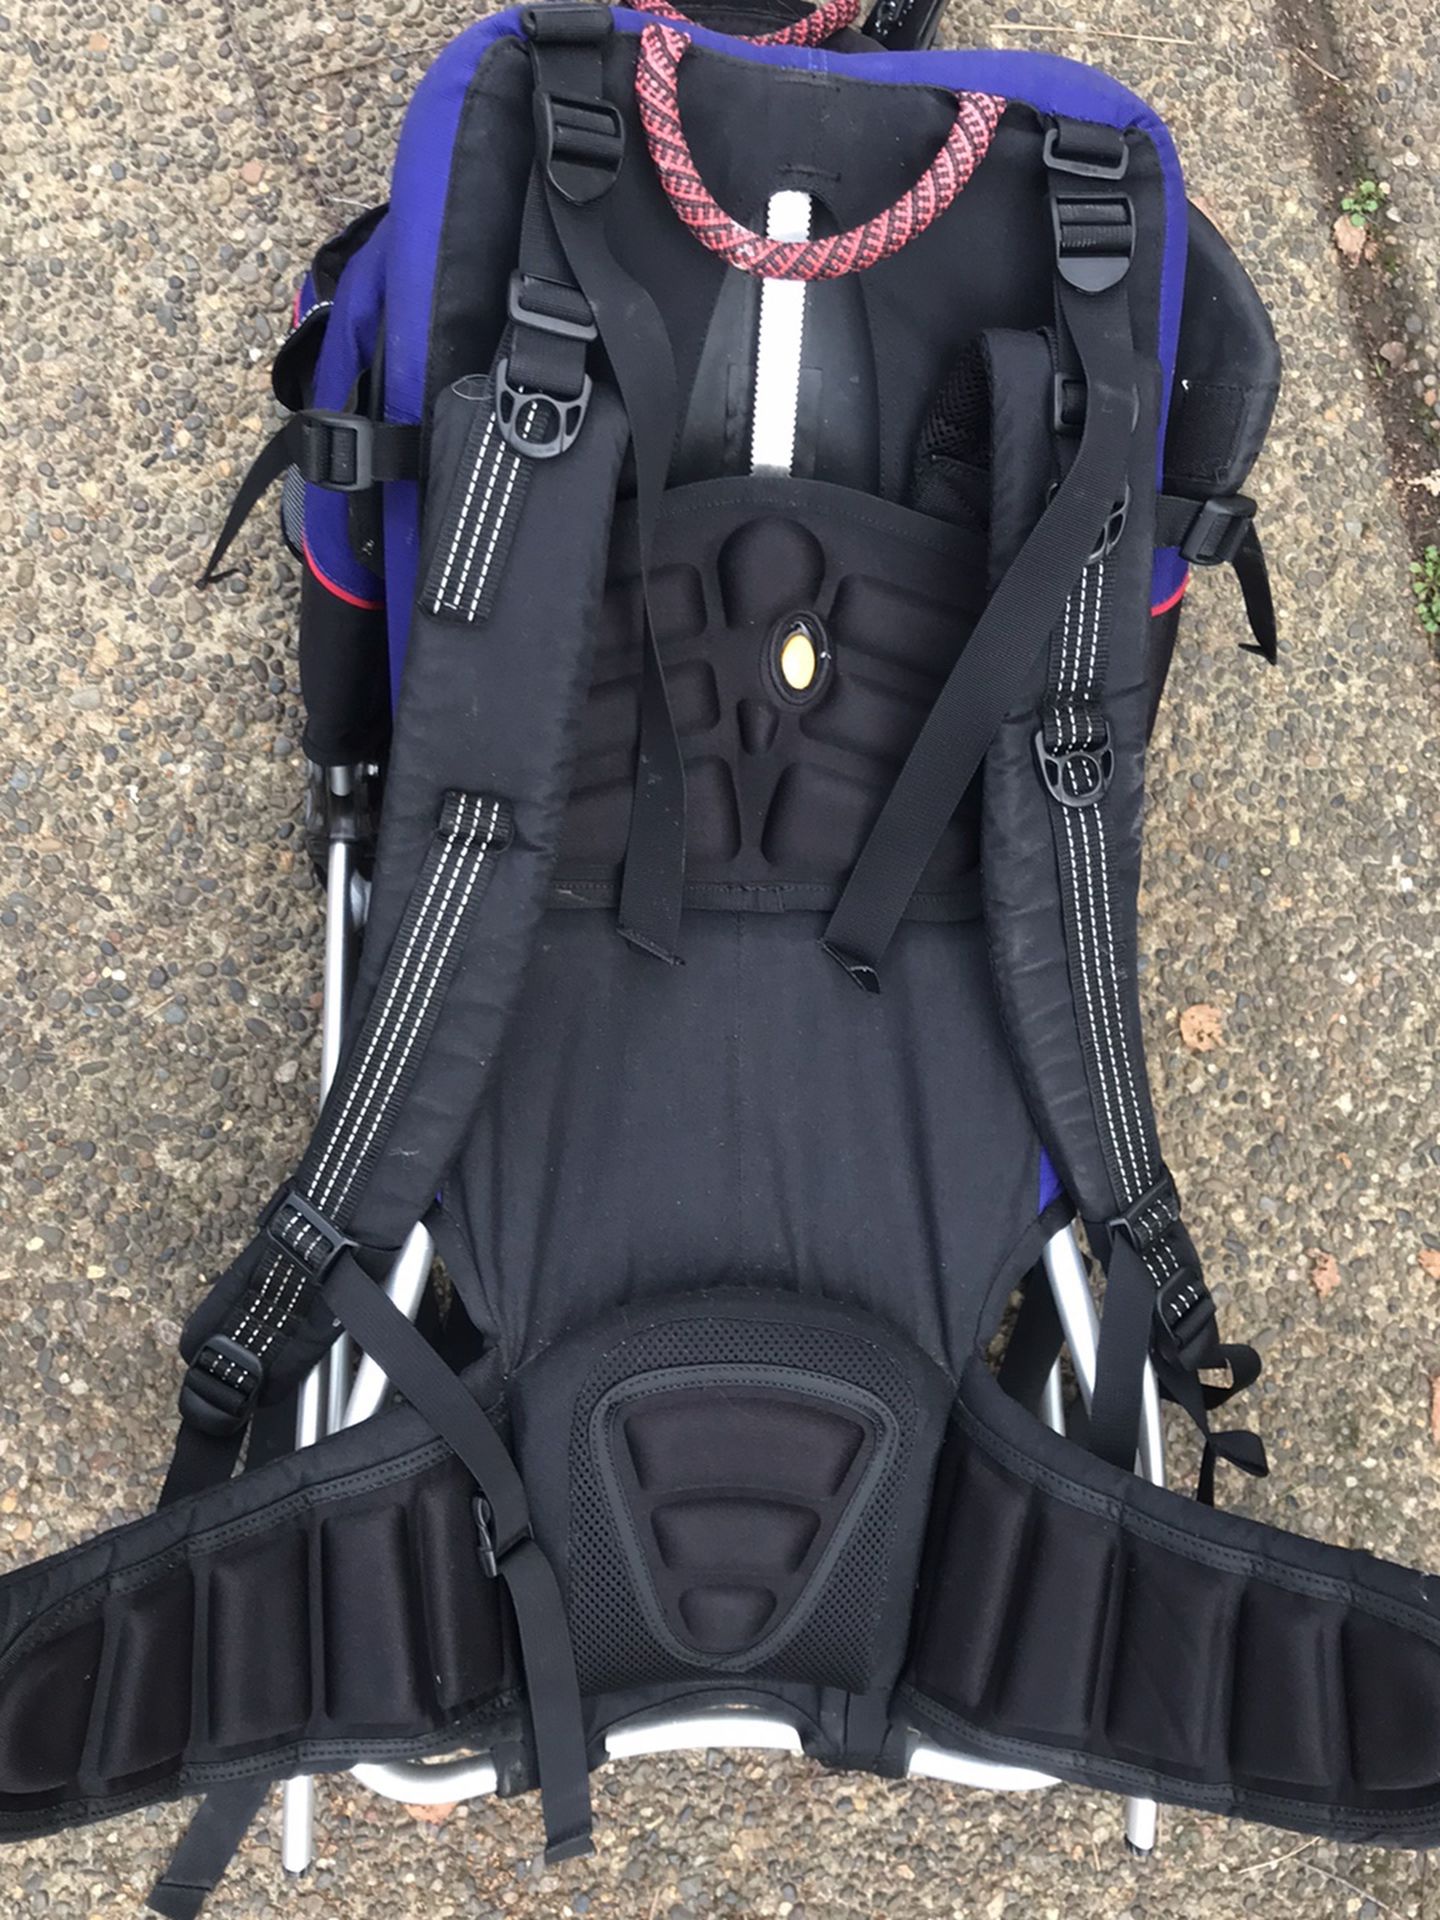 Kelty Backcountry Backpack With Carrier